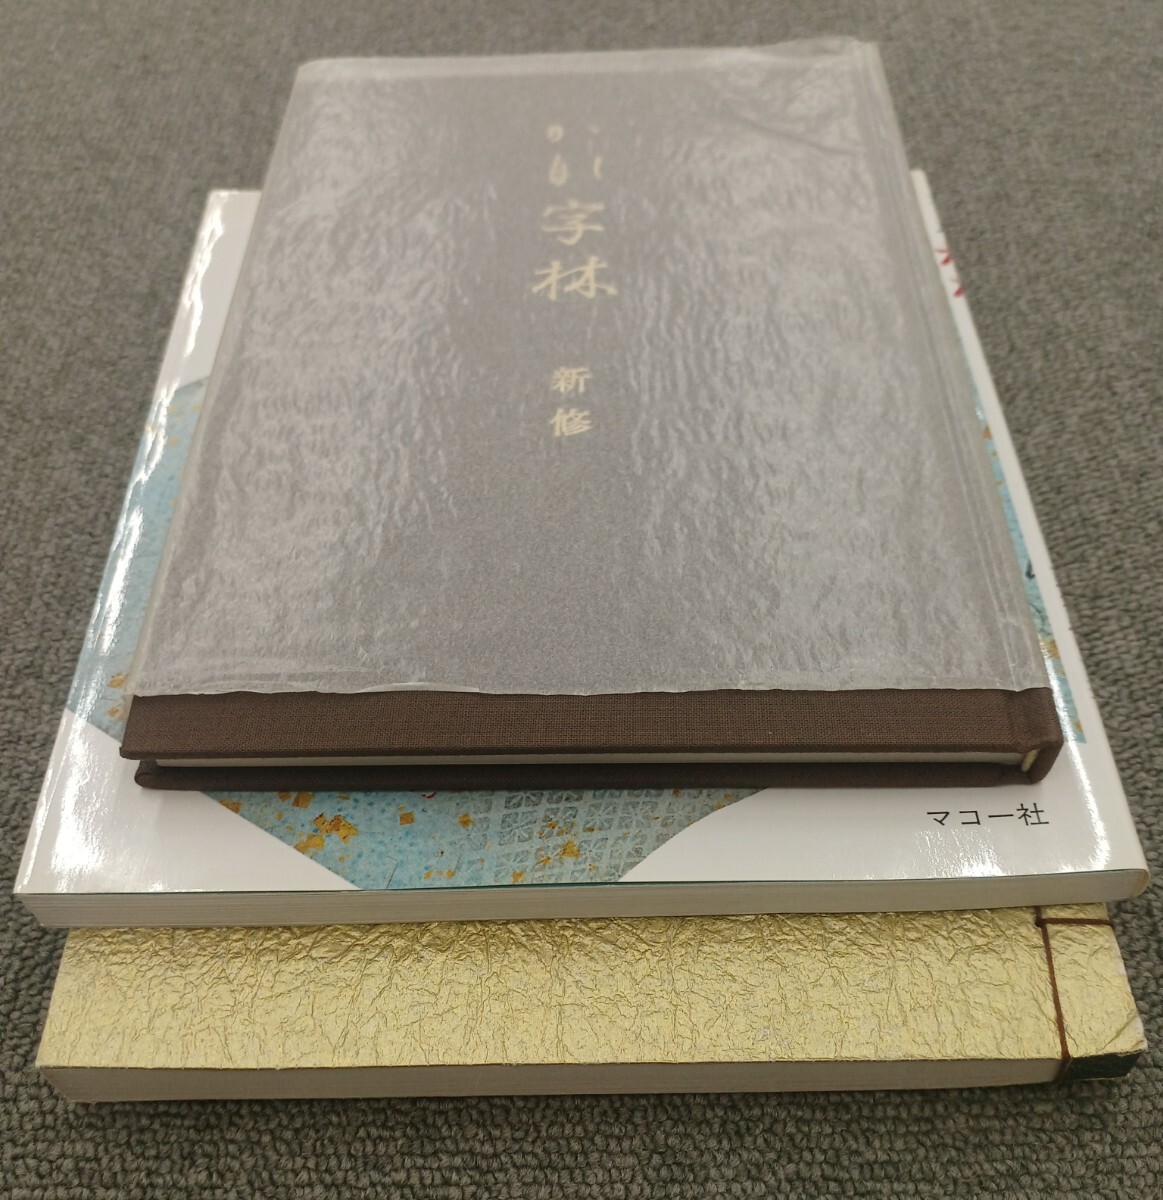 #H.F#.. character . small . Hyakunin Isshu cards calligraphy ..3 pcs. set mulberry rice field . boat stone rice field line . Kumagaya .. calligraphy book@ reference book dictionary research publication secondhand book [.]